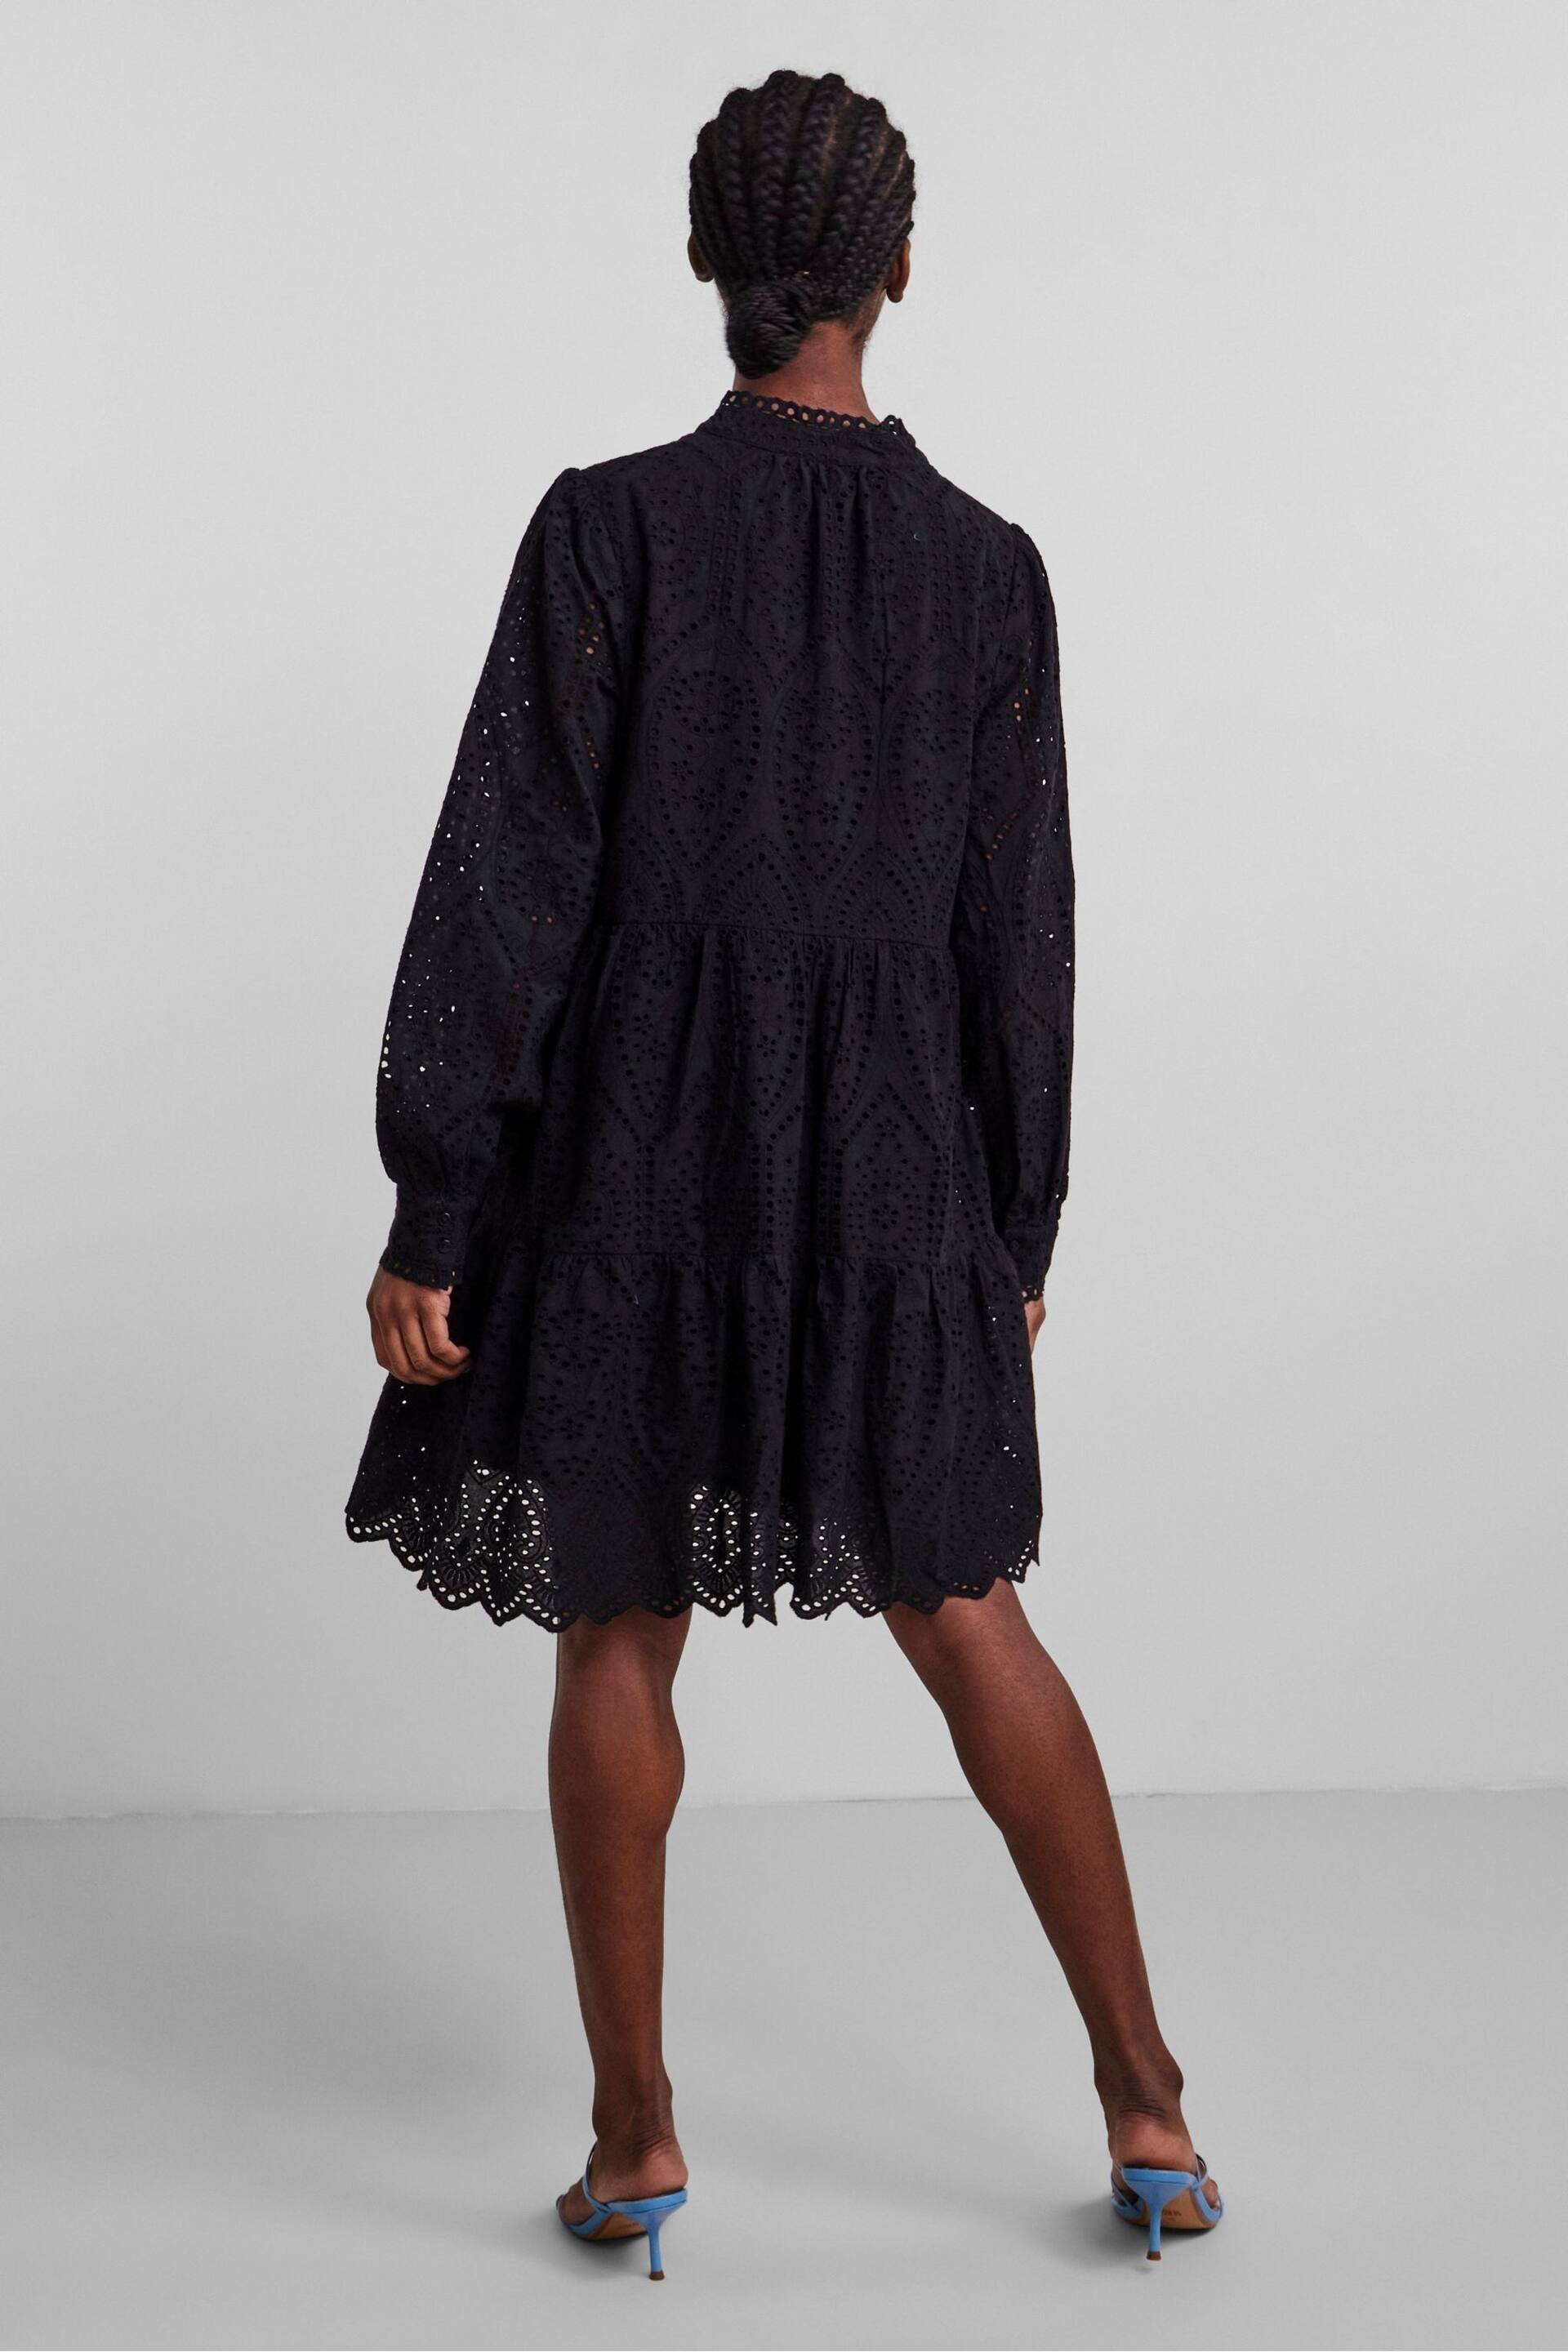 Y.A.S Black Broderie Long Sleeved Dress - Image 3 of 5